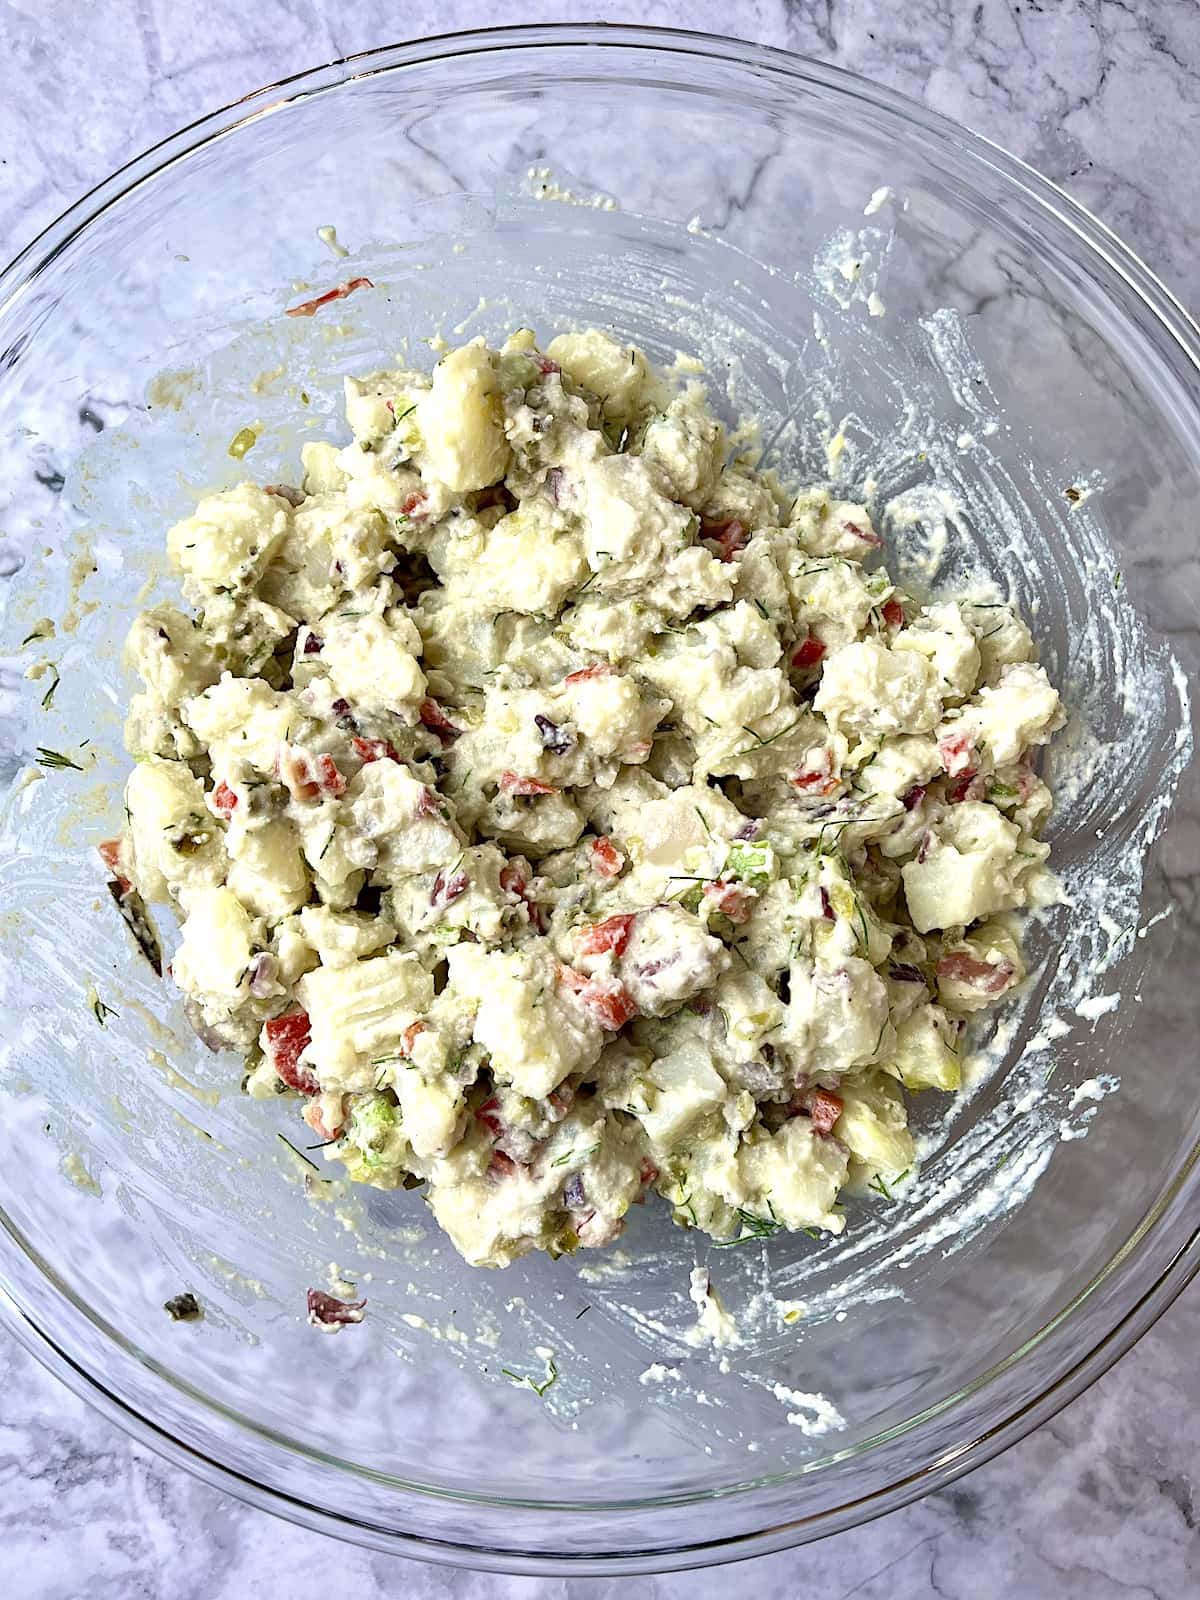 Potato salad with a creamy vegan dressing mixed in a large glass bowl.